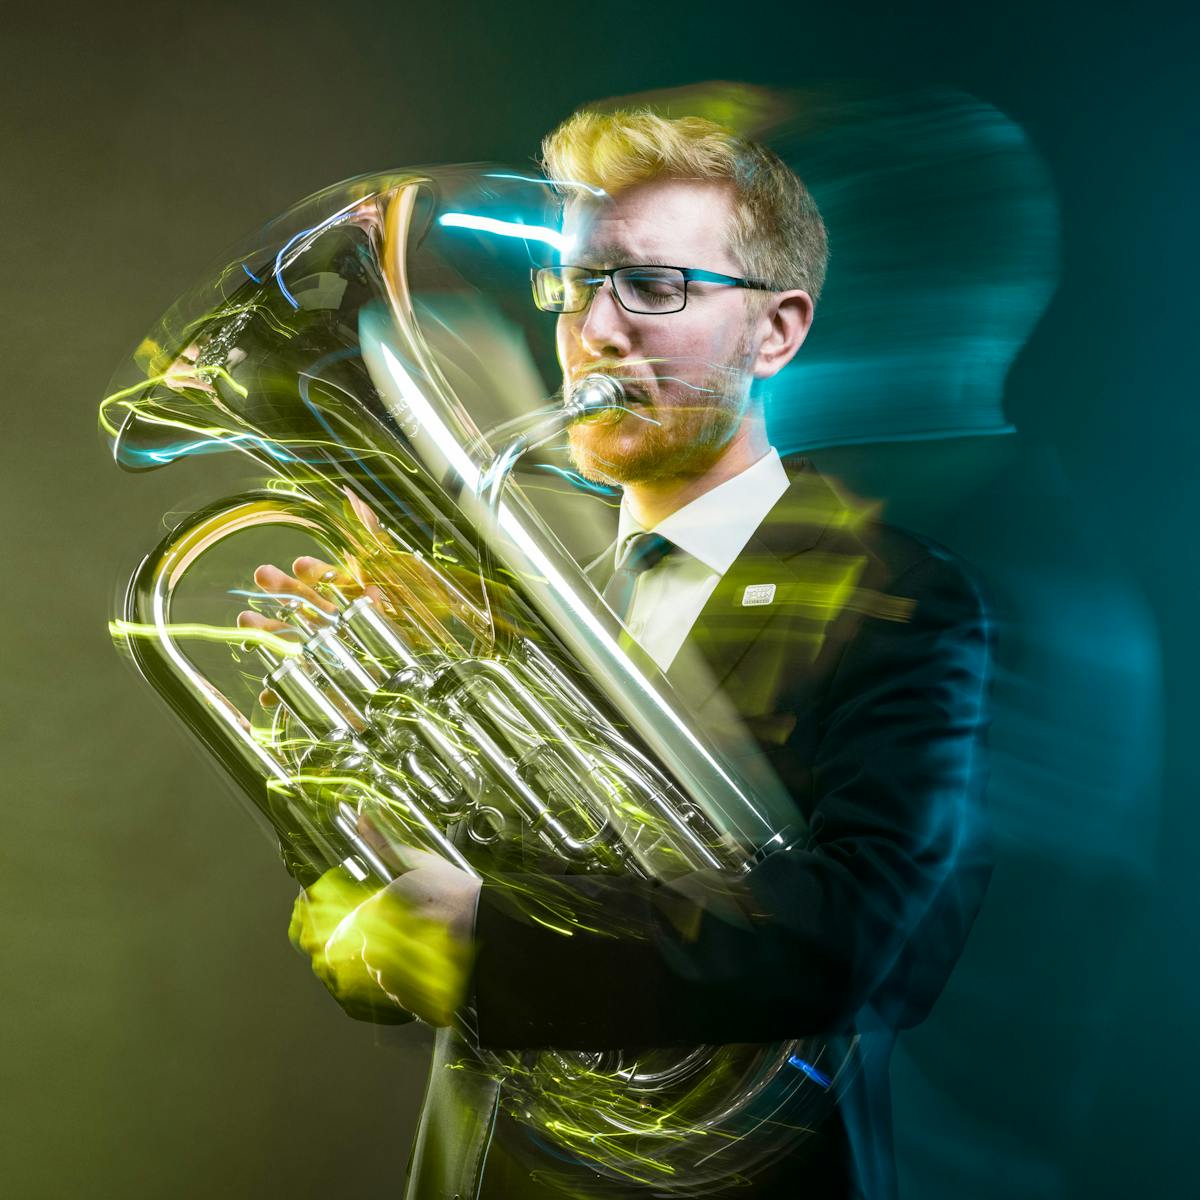 Photograph of a young man playing a euphonium against a dark background. The slow exposure of the camera causes his movements to be traced across the image as a blur. He is surrounded by wisps of smoke which are coloured yellow on the left of the frame and a blue on the right.